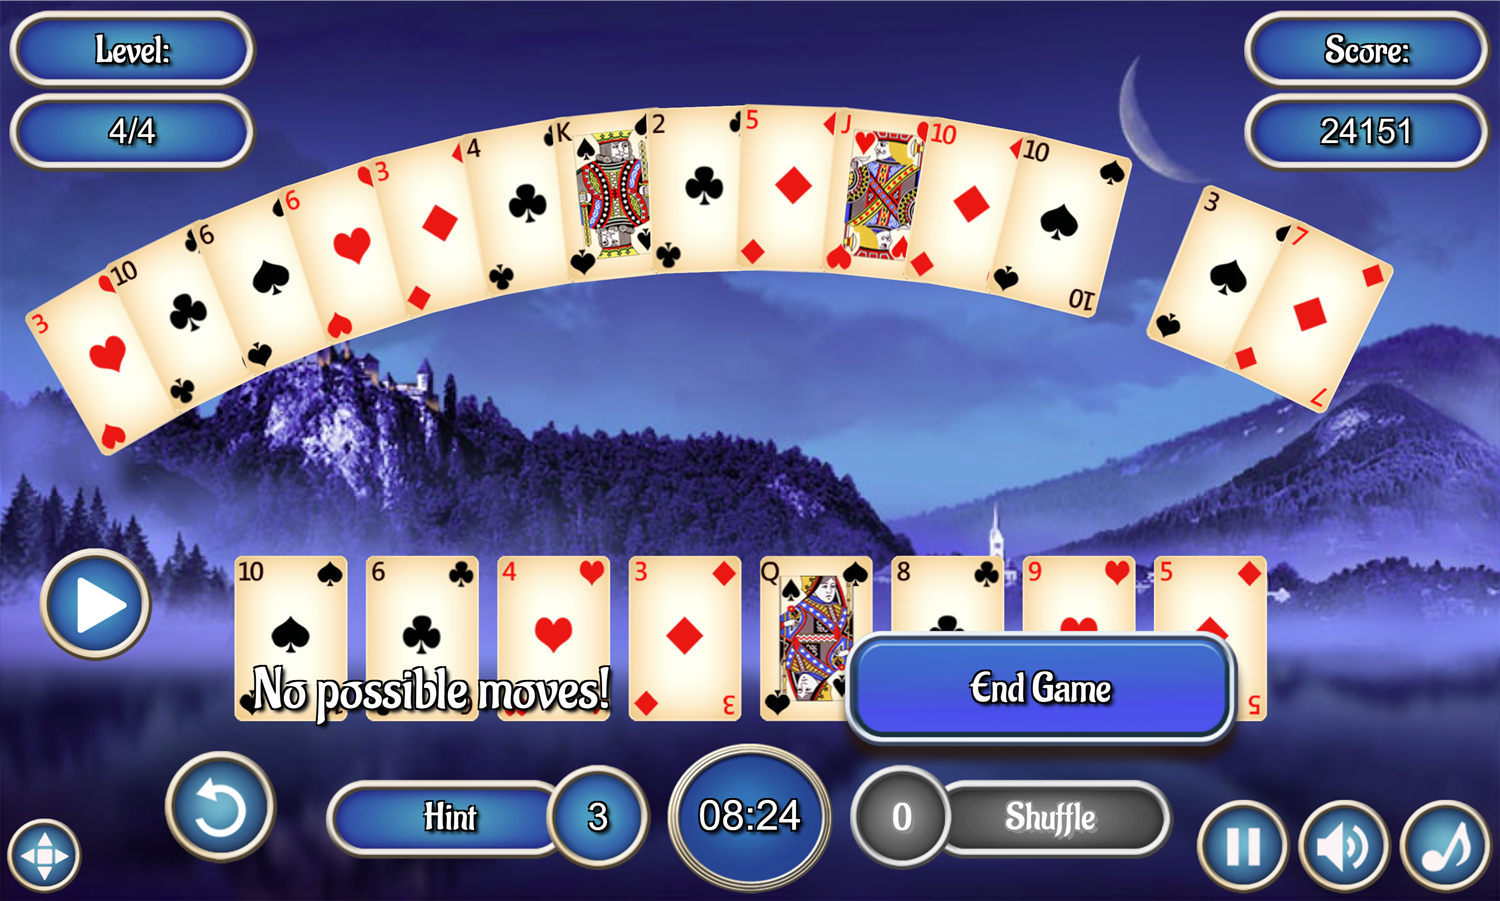 Crescent Solitaire Game No Possible Moves Screen Screenshot.